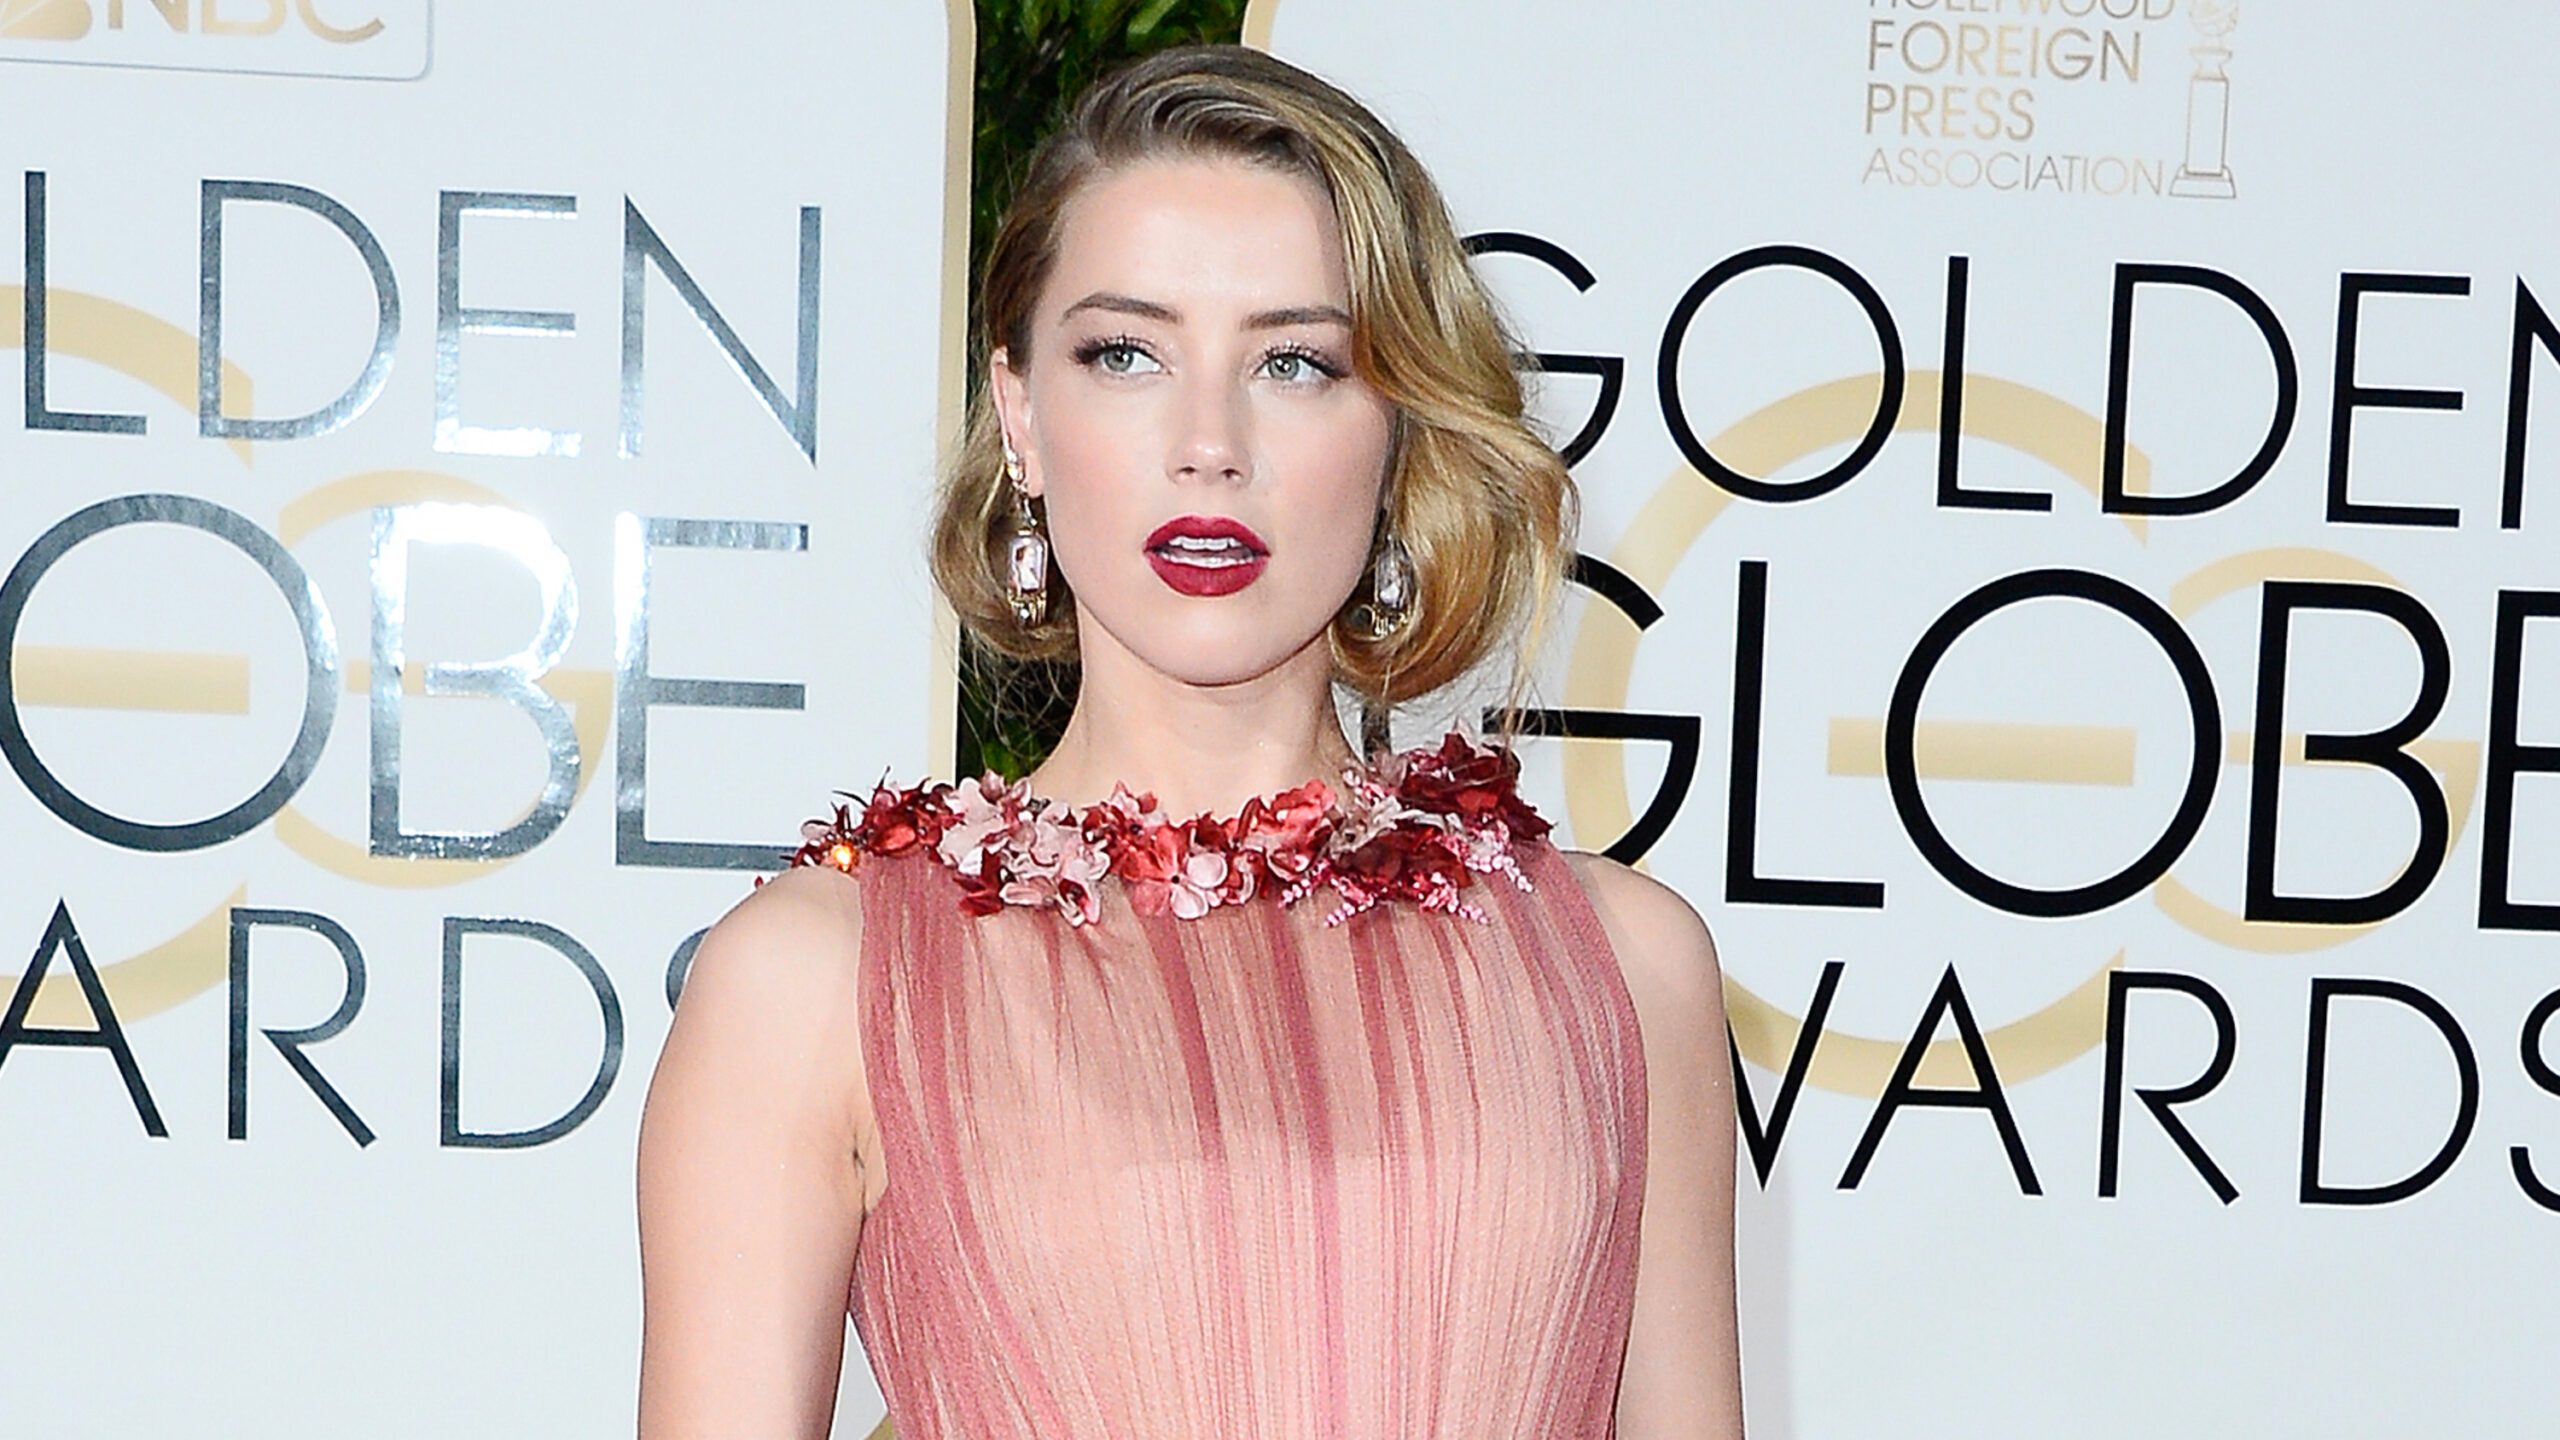 Amber Heard files domestic violence report against Johnny Depp